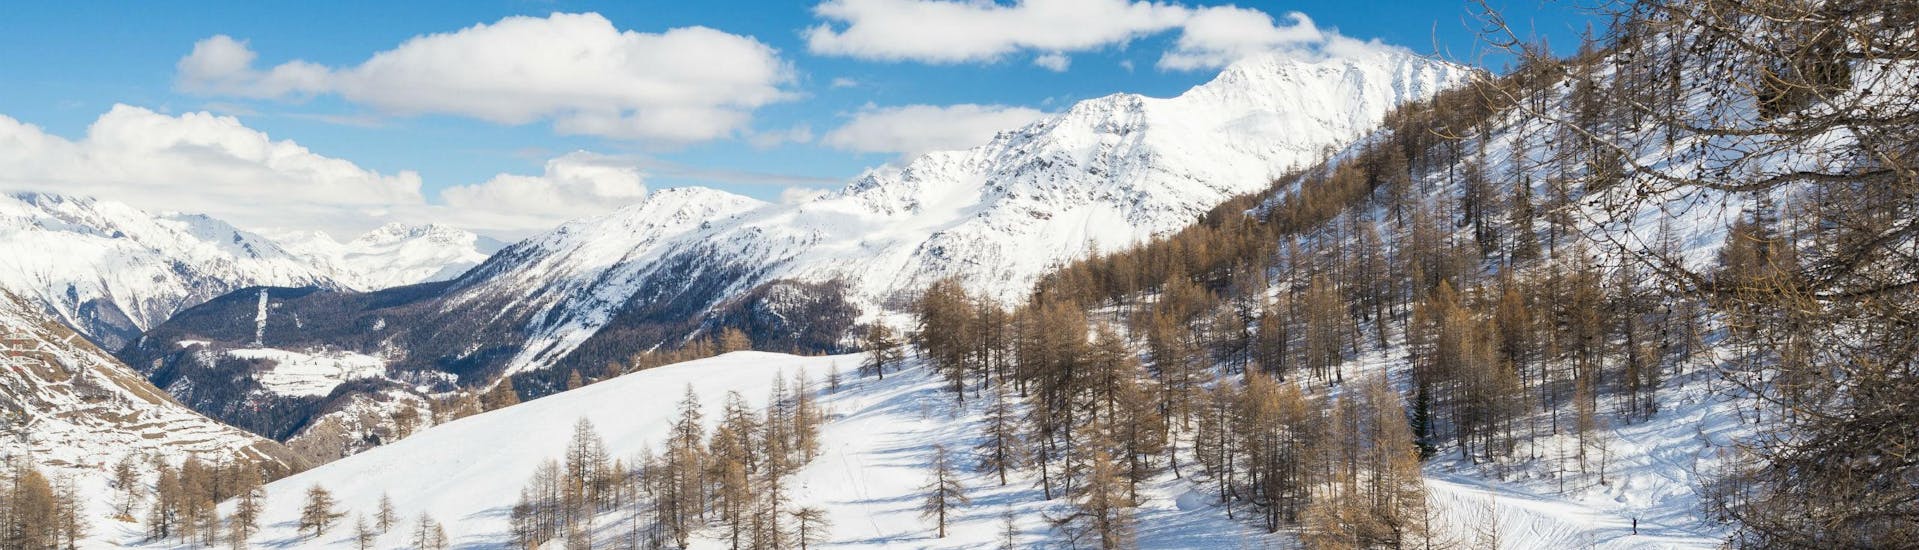 An image of the snowy mountainscape in the French ski resort of La Rosière, where aspiring skiers can book ski lessons with the local ski schools. 